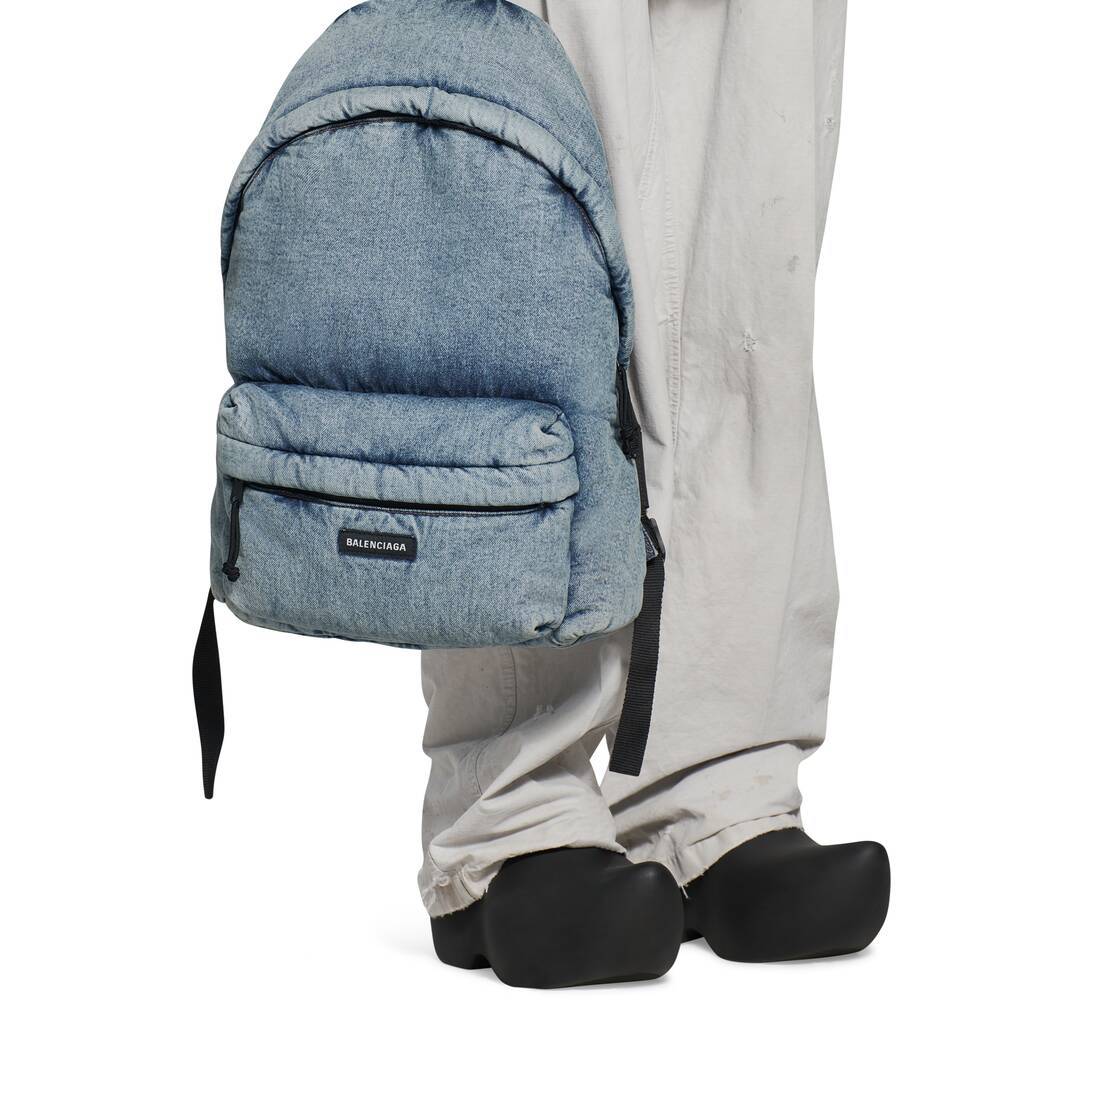 Buy Eurostyle Stylish Denim Jeans Blue Canvas 24 Liters Casual Backpack Bag  (13013) at Amazon.in